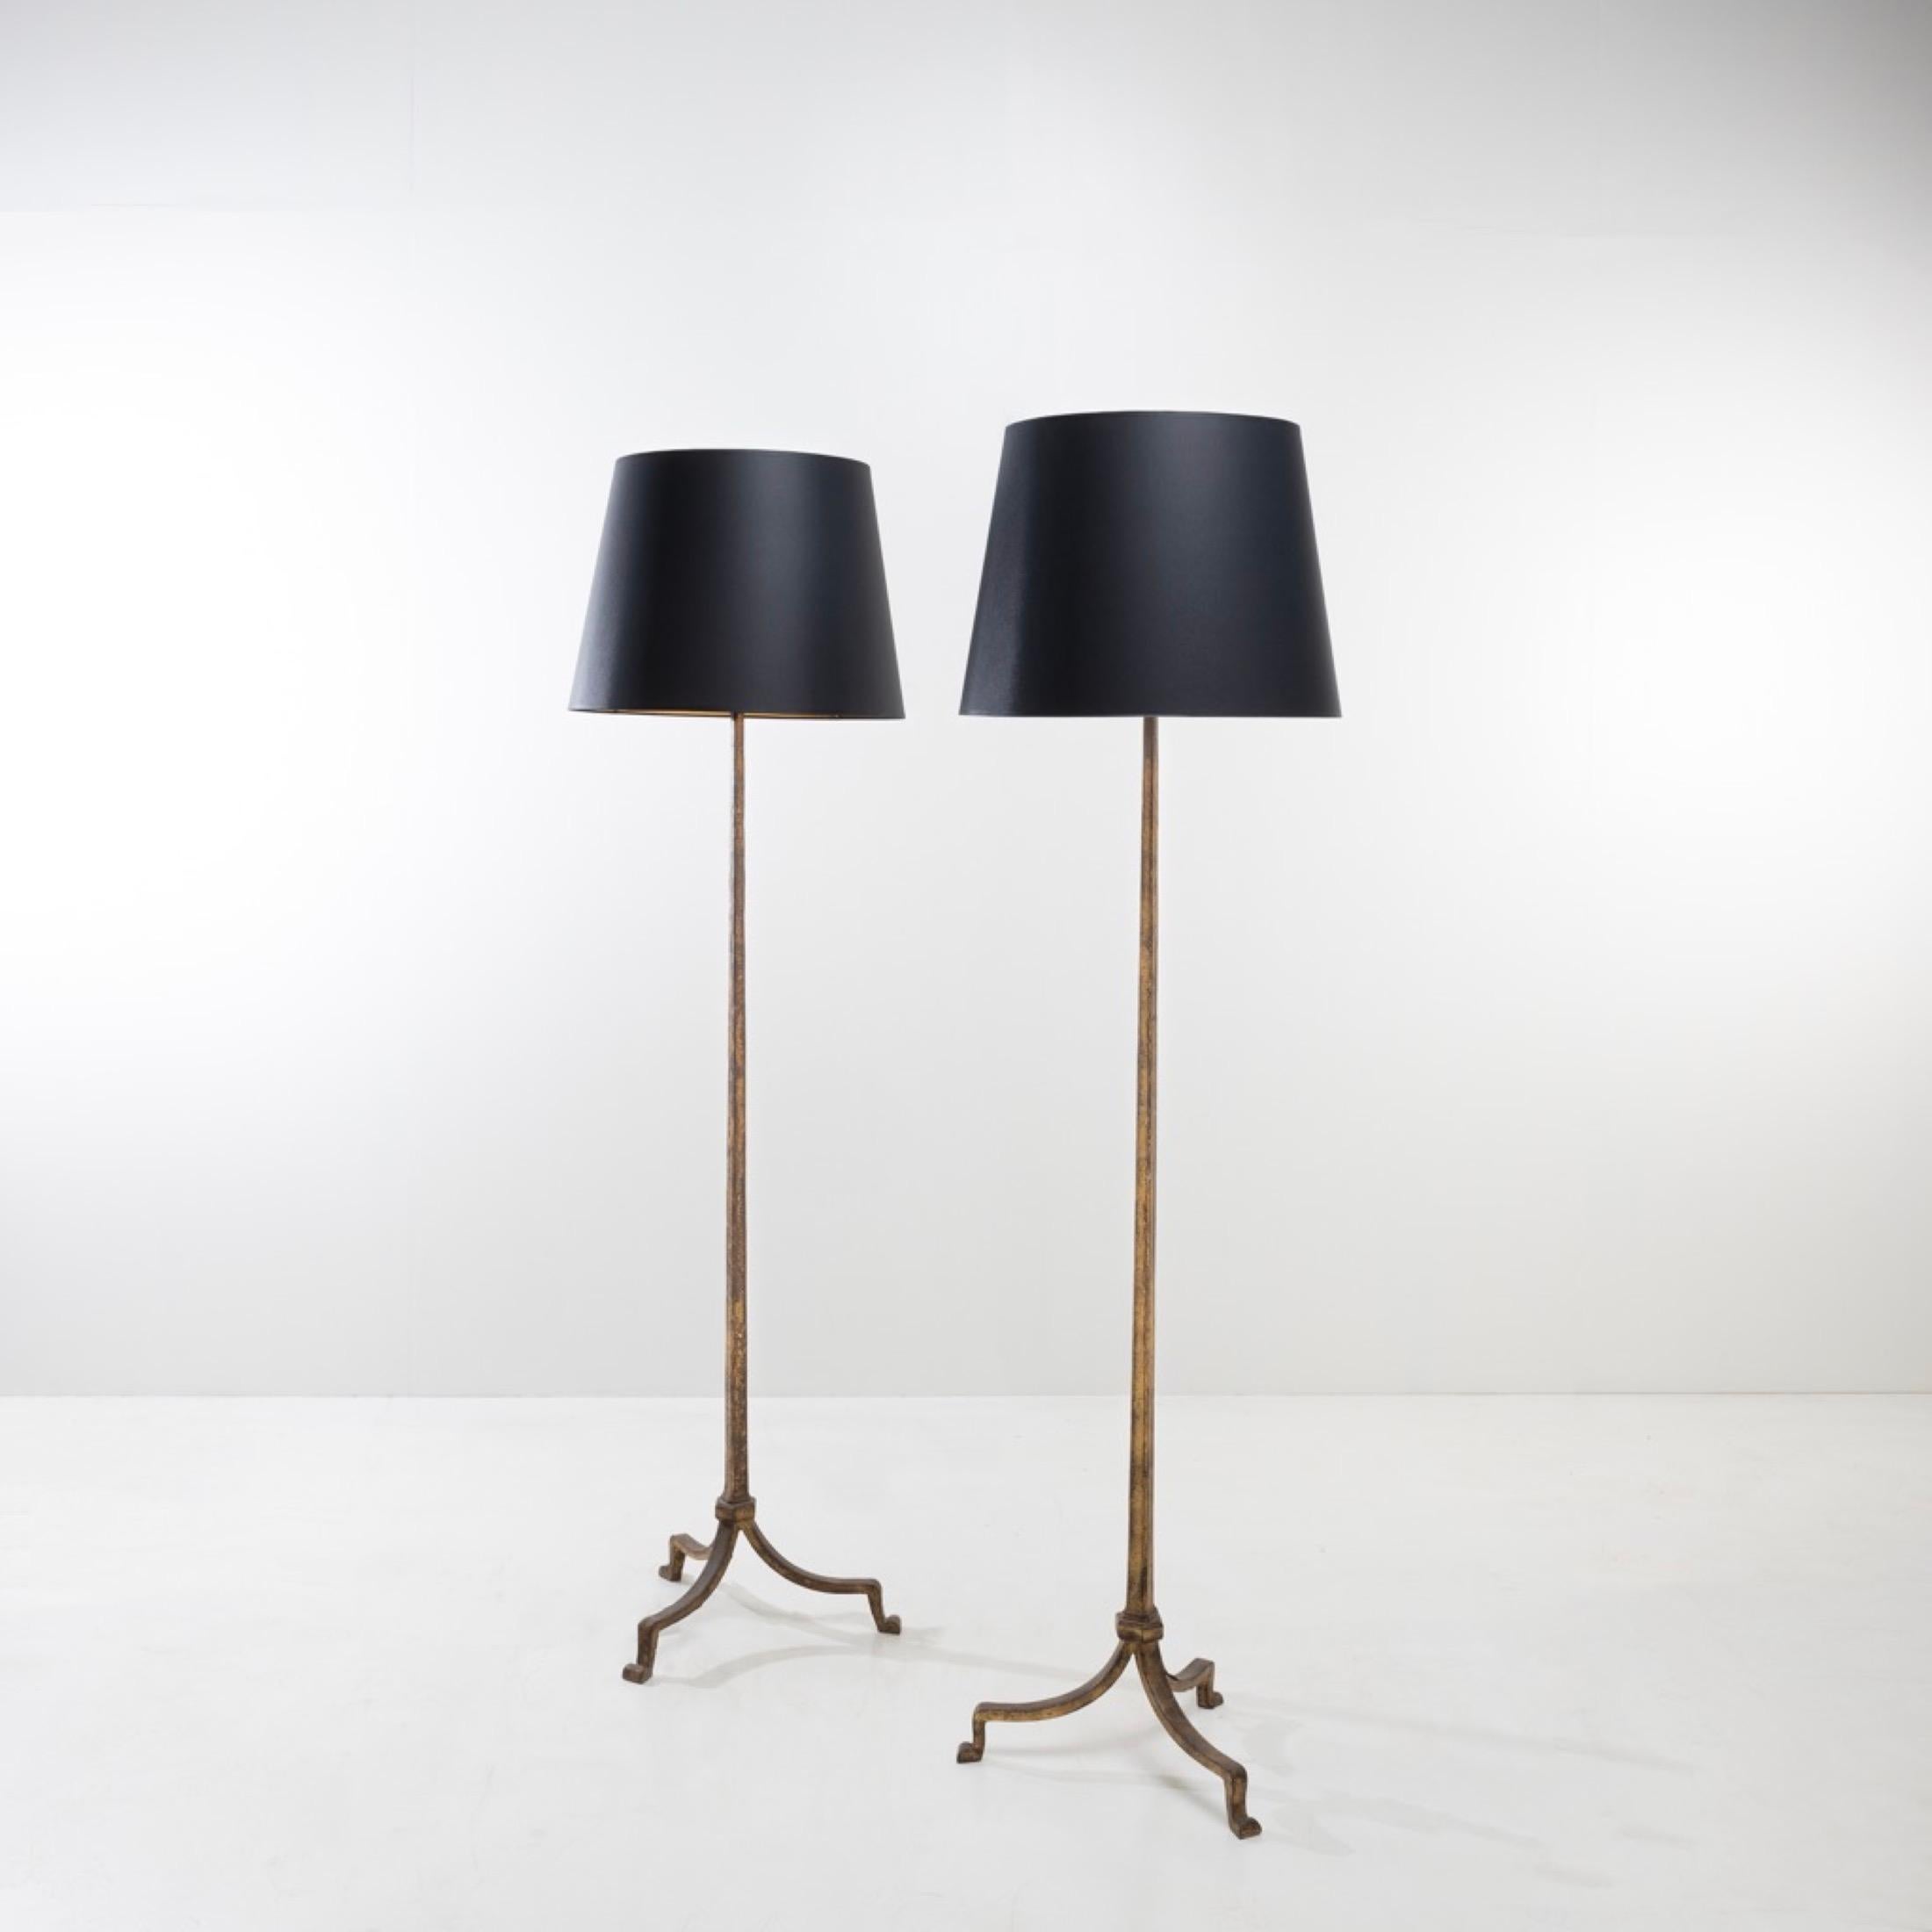 A pair of mid-century golden iron floor lamps designed and manufactured By Maison Ramsay, Paris France around 1950-1960. Very clean and sharp lines, the lamps are made of beaten iron. 